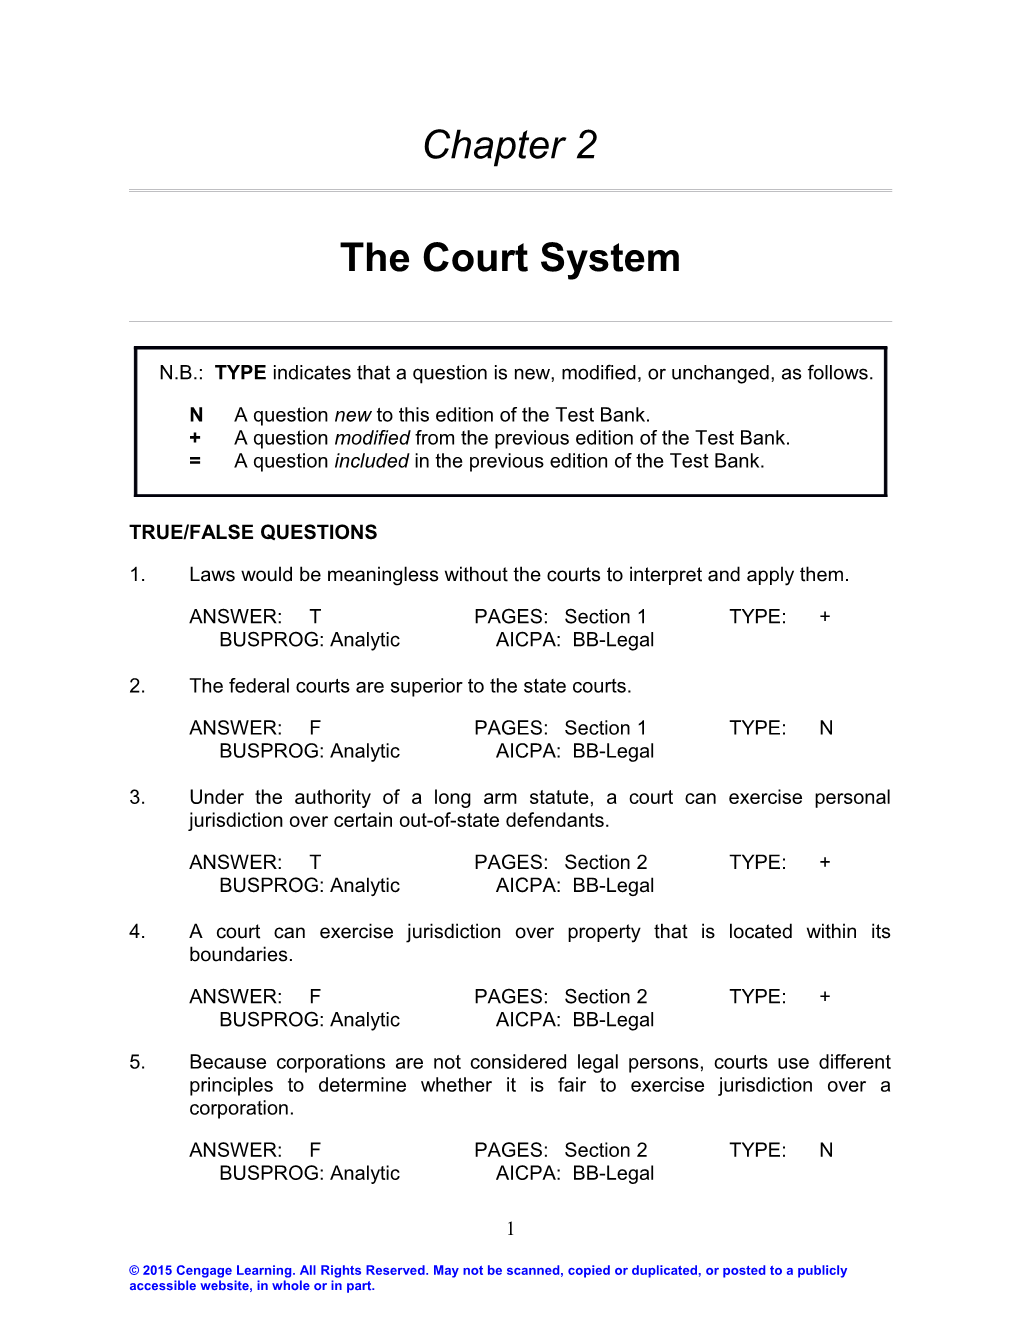 Chapter 2: the Court System 1